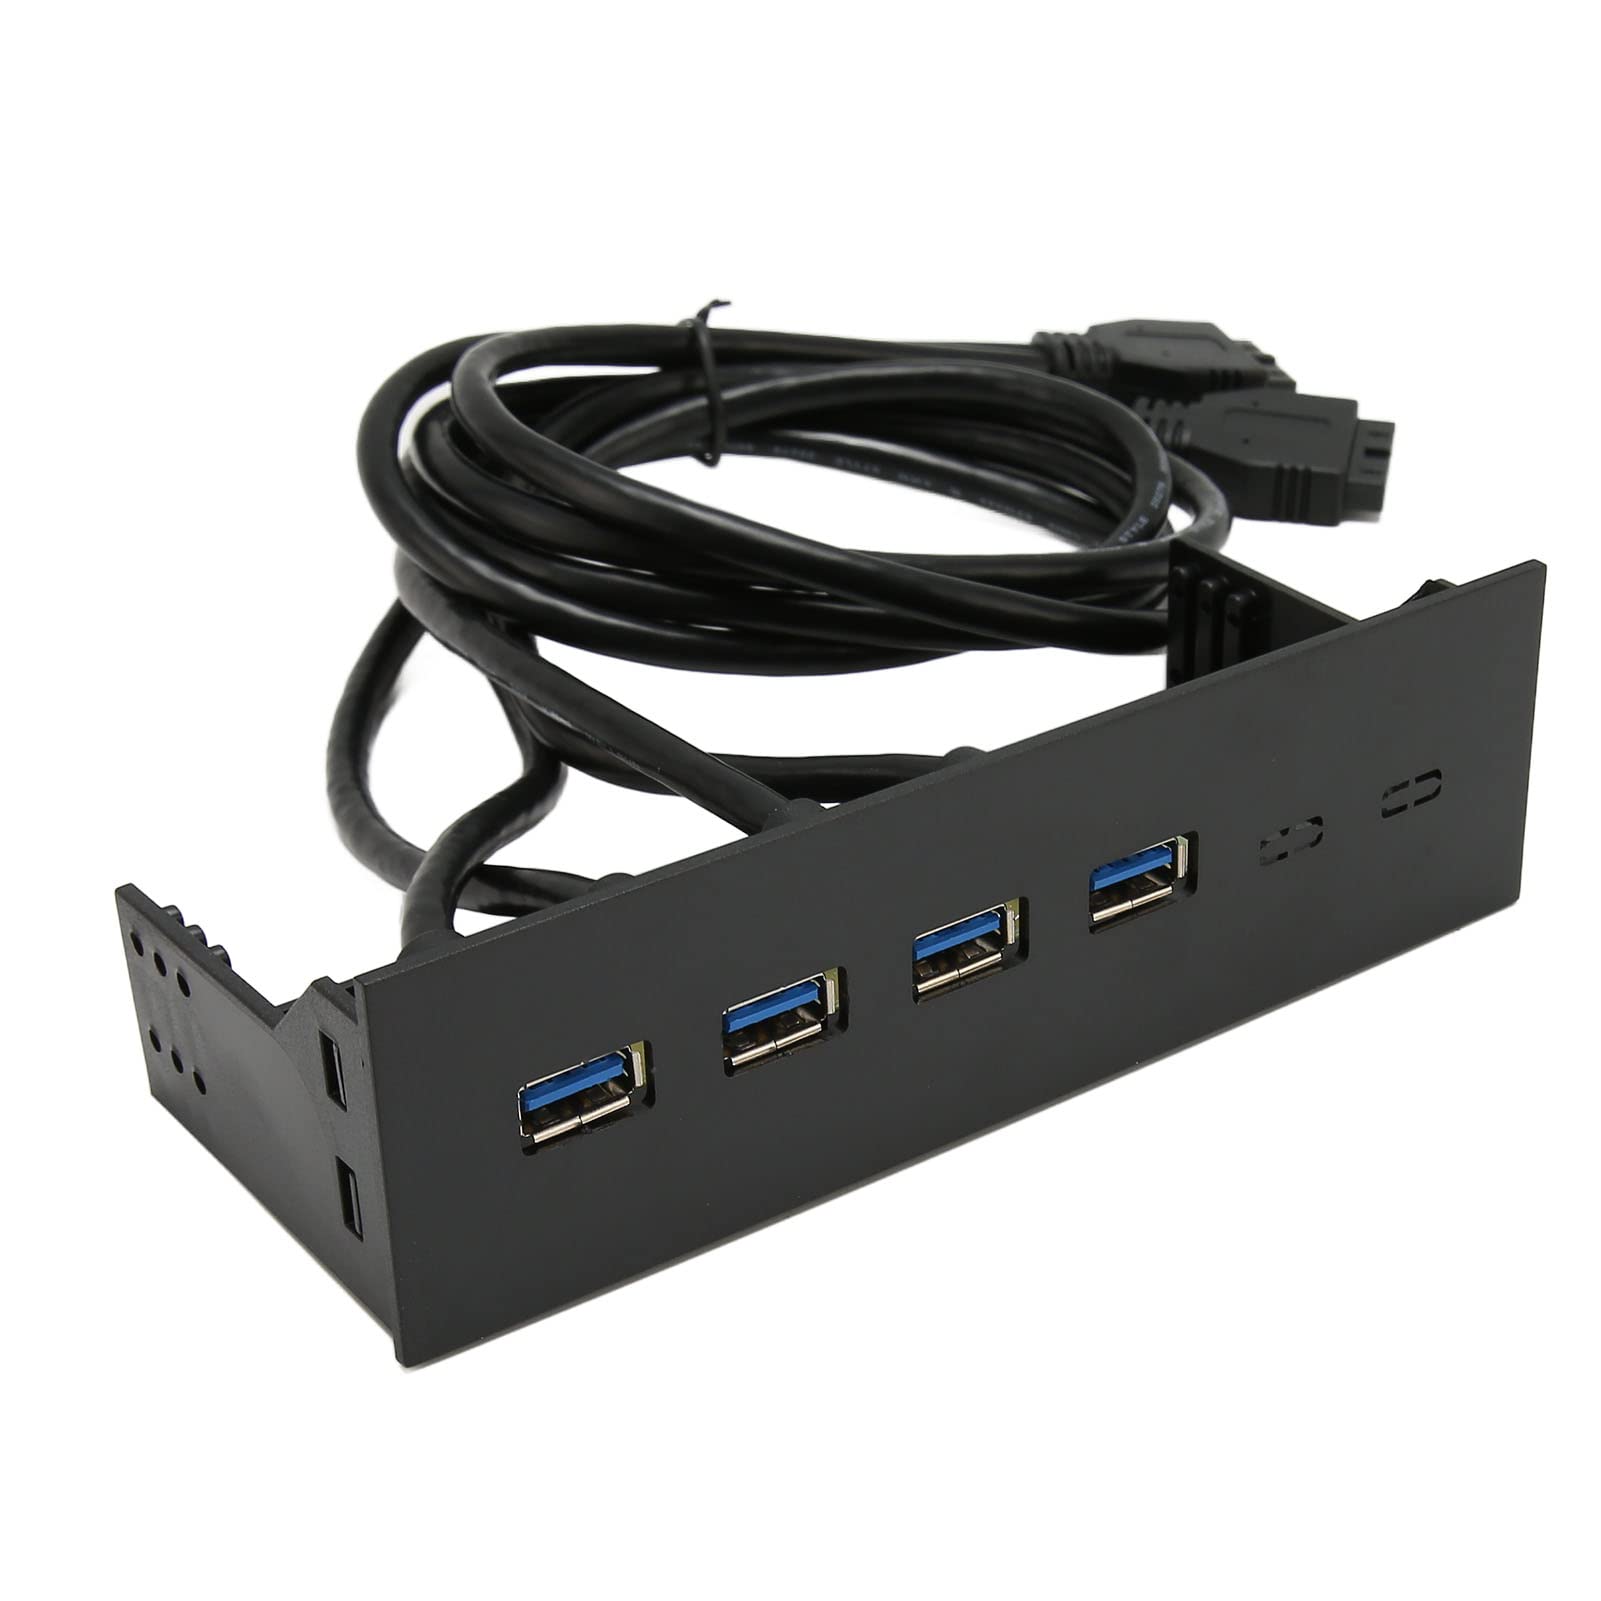 Computer with USB ports